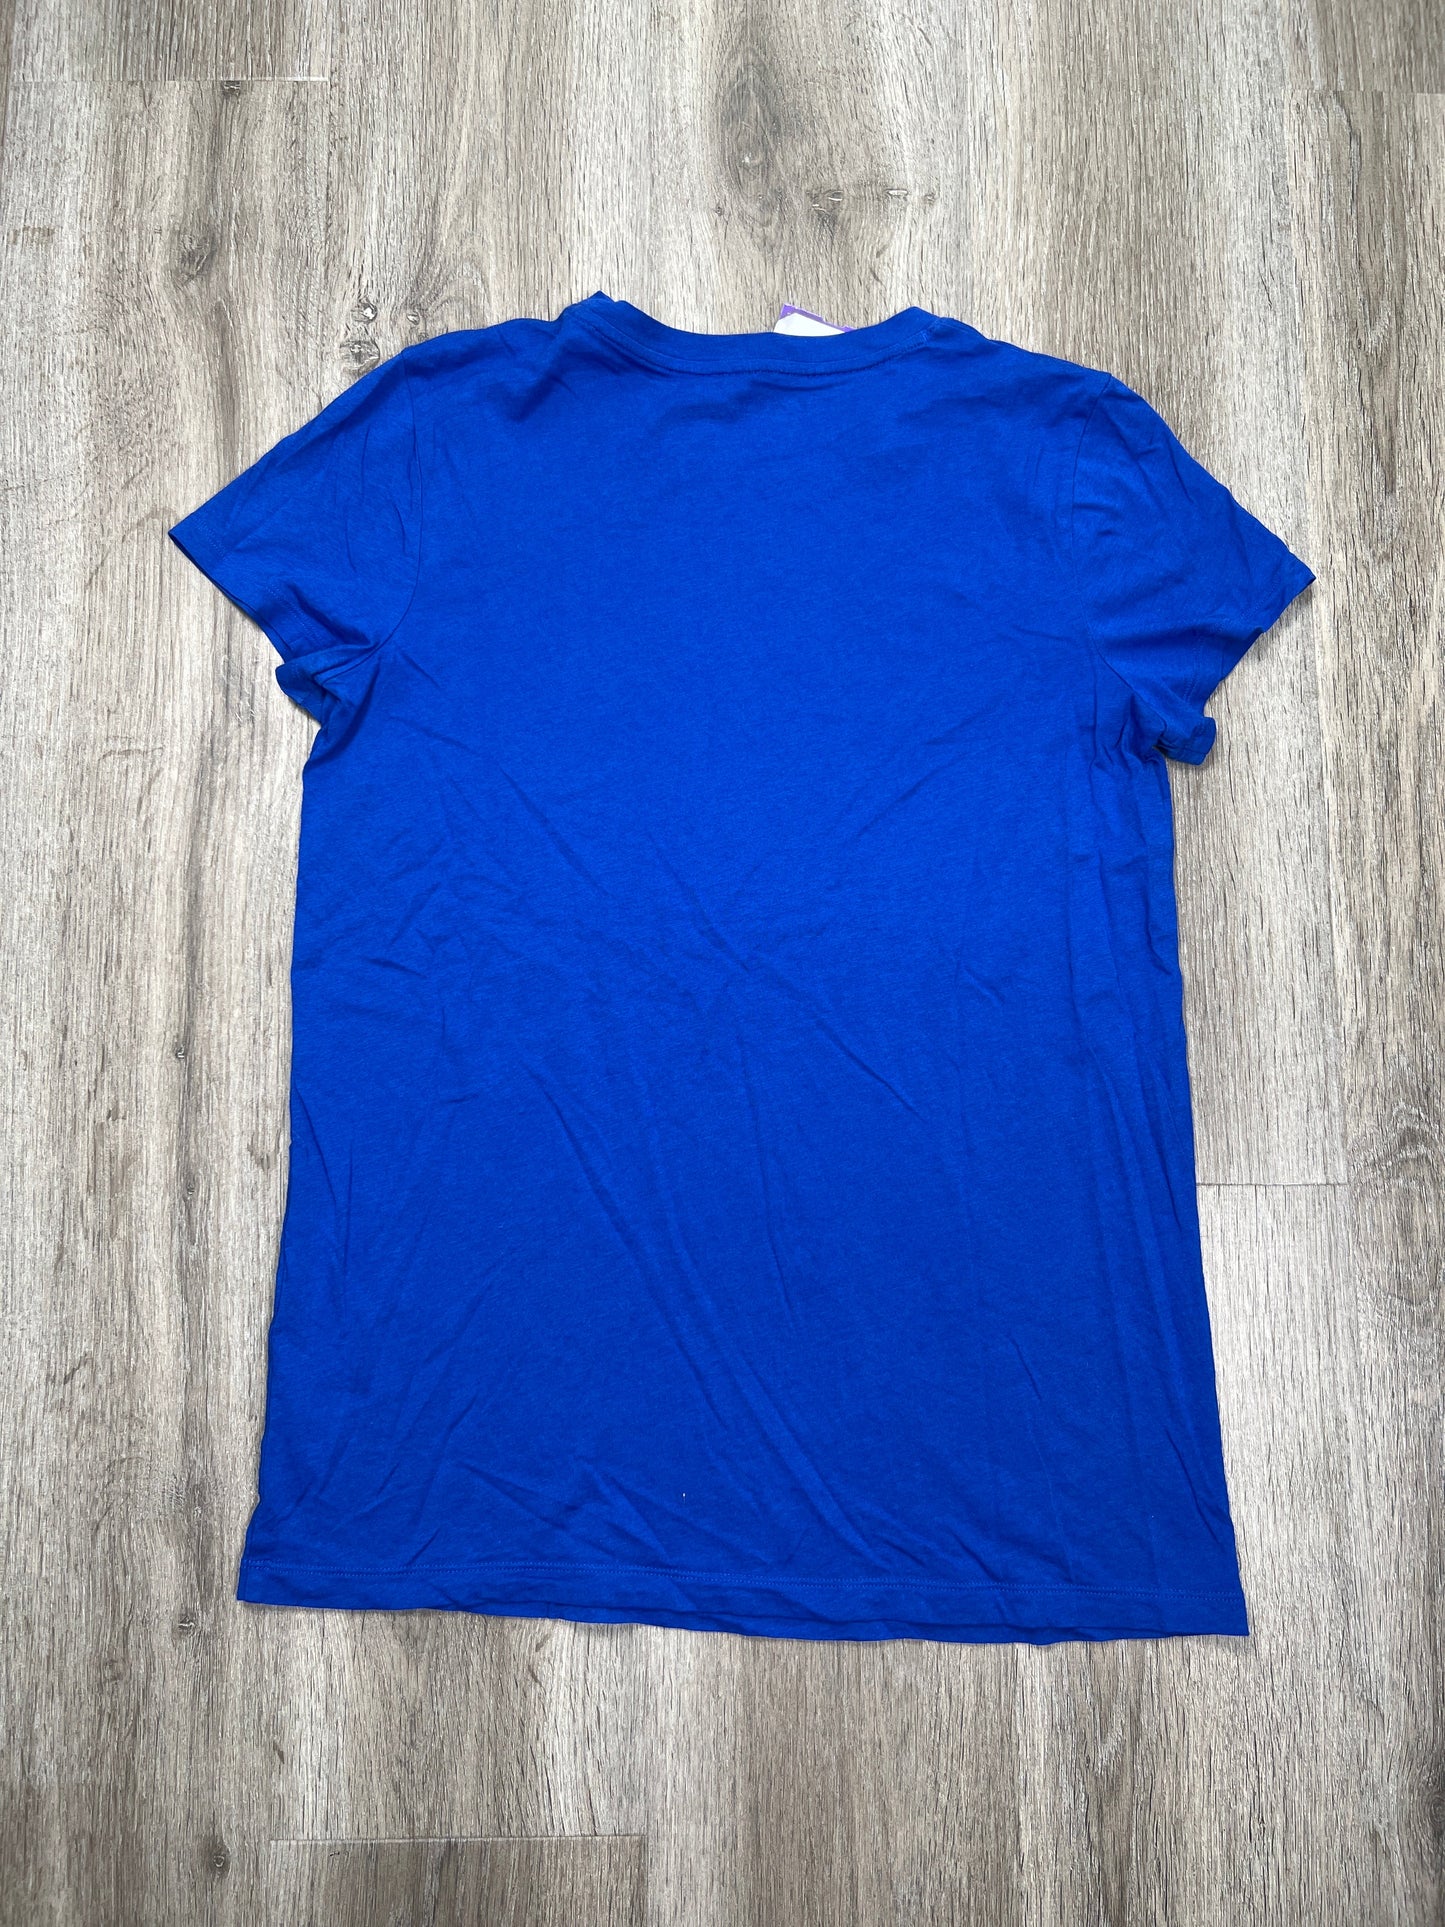 Blue Top Short Sleeve Under Armour, Size M